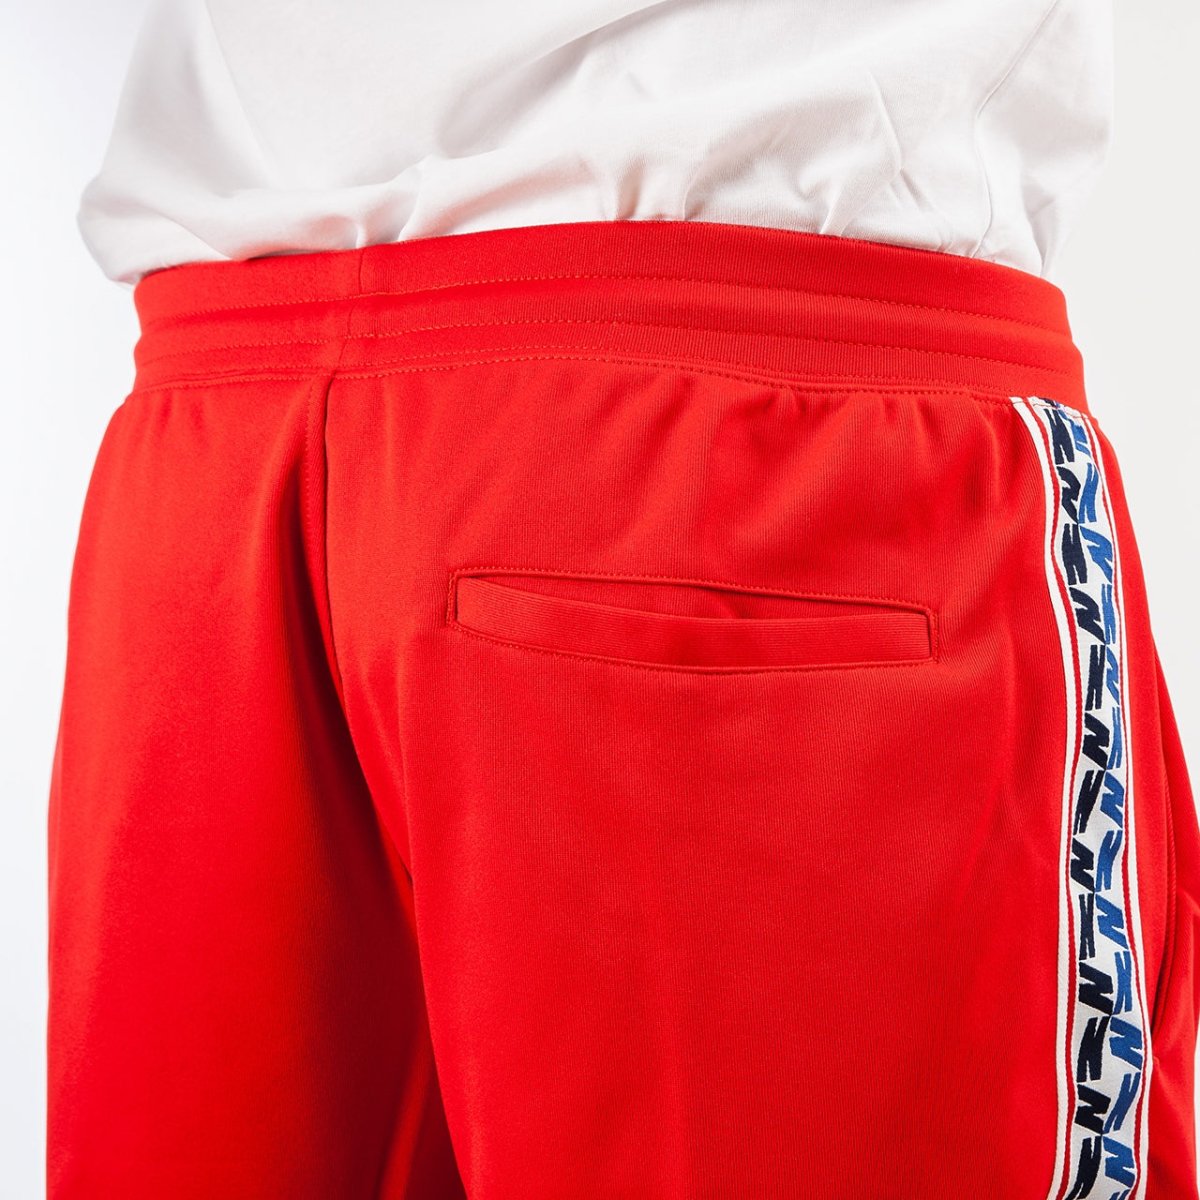 Nike NSW Taped Poly Shorts (Rot / Weiß)  - Allike Store